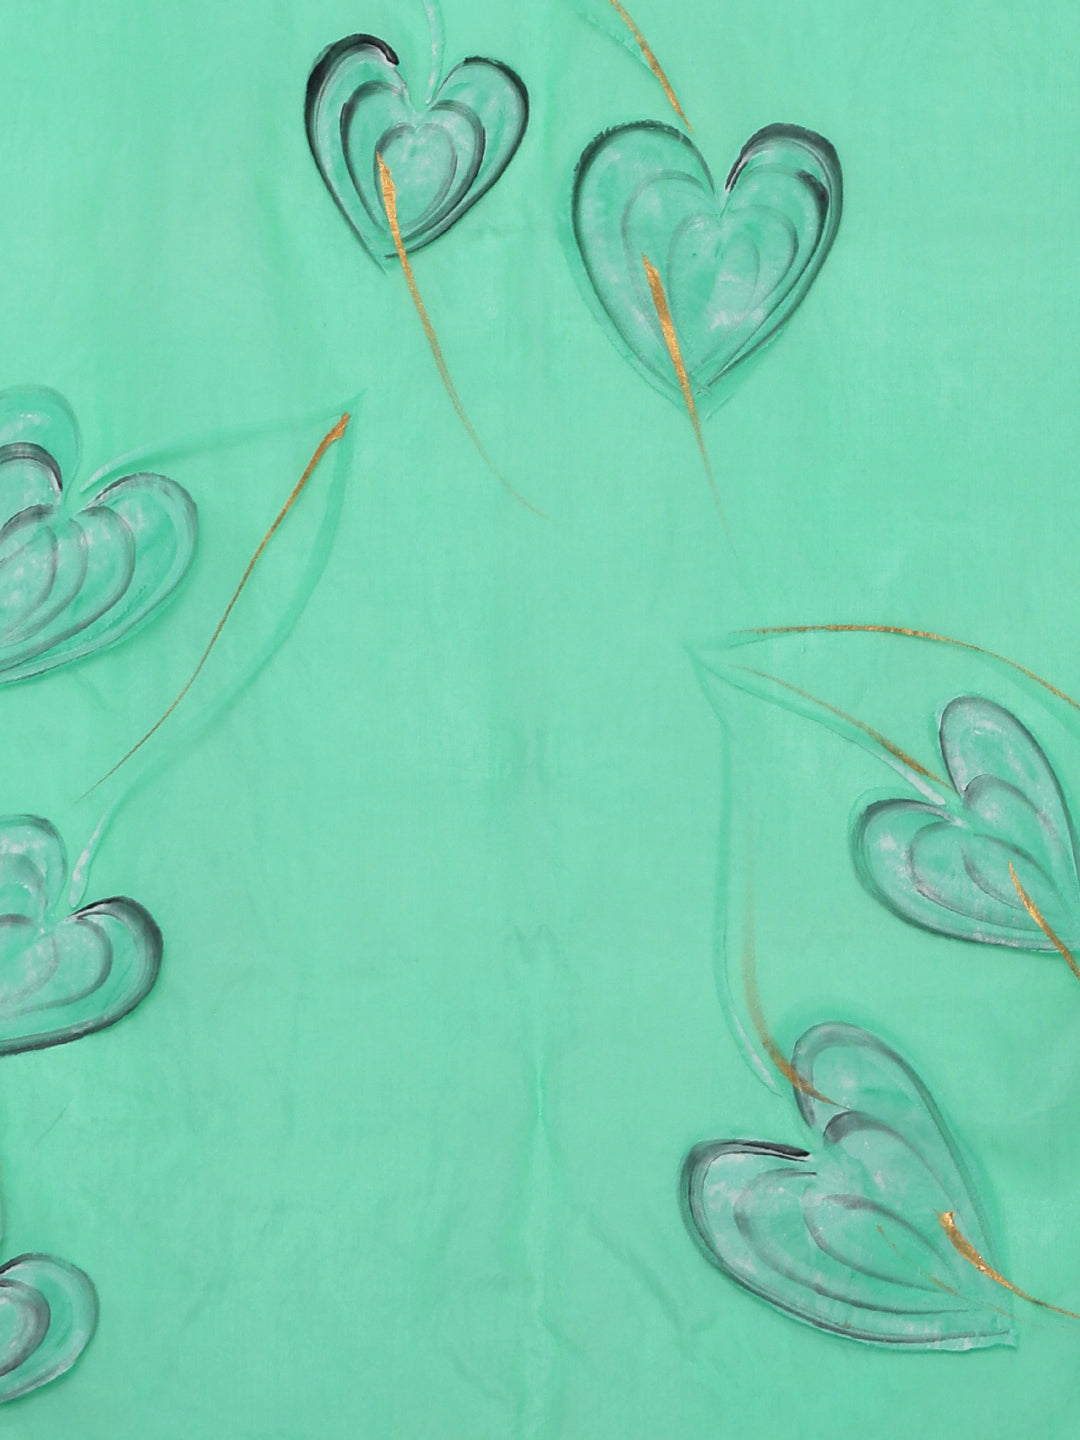 Kalakari India Organza Hand Painted Saree With Blouse BHKPSA0157-Saree-Kalakari India-BHKPSA0157-Bollywood, Fashion, Geographical Indication, Hand Crafted, Heritage Prints, Natural Dyes, Organza, Sarees, Sustainable Fabrics, Woven-[Linen,Ethnic,wear,Fashionista,Handloom,Handicraft,Indigo,blockprint,block,print,Cotton,Chanderi,Blue, latest,classy,party,bollywood,trendy,summer,style,traditional,formal,elegant,unique,style,hand,block,print, dabu,booti,gift,present,glamorous,affordable,collectible,S